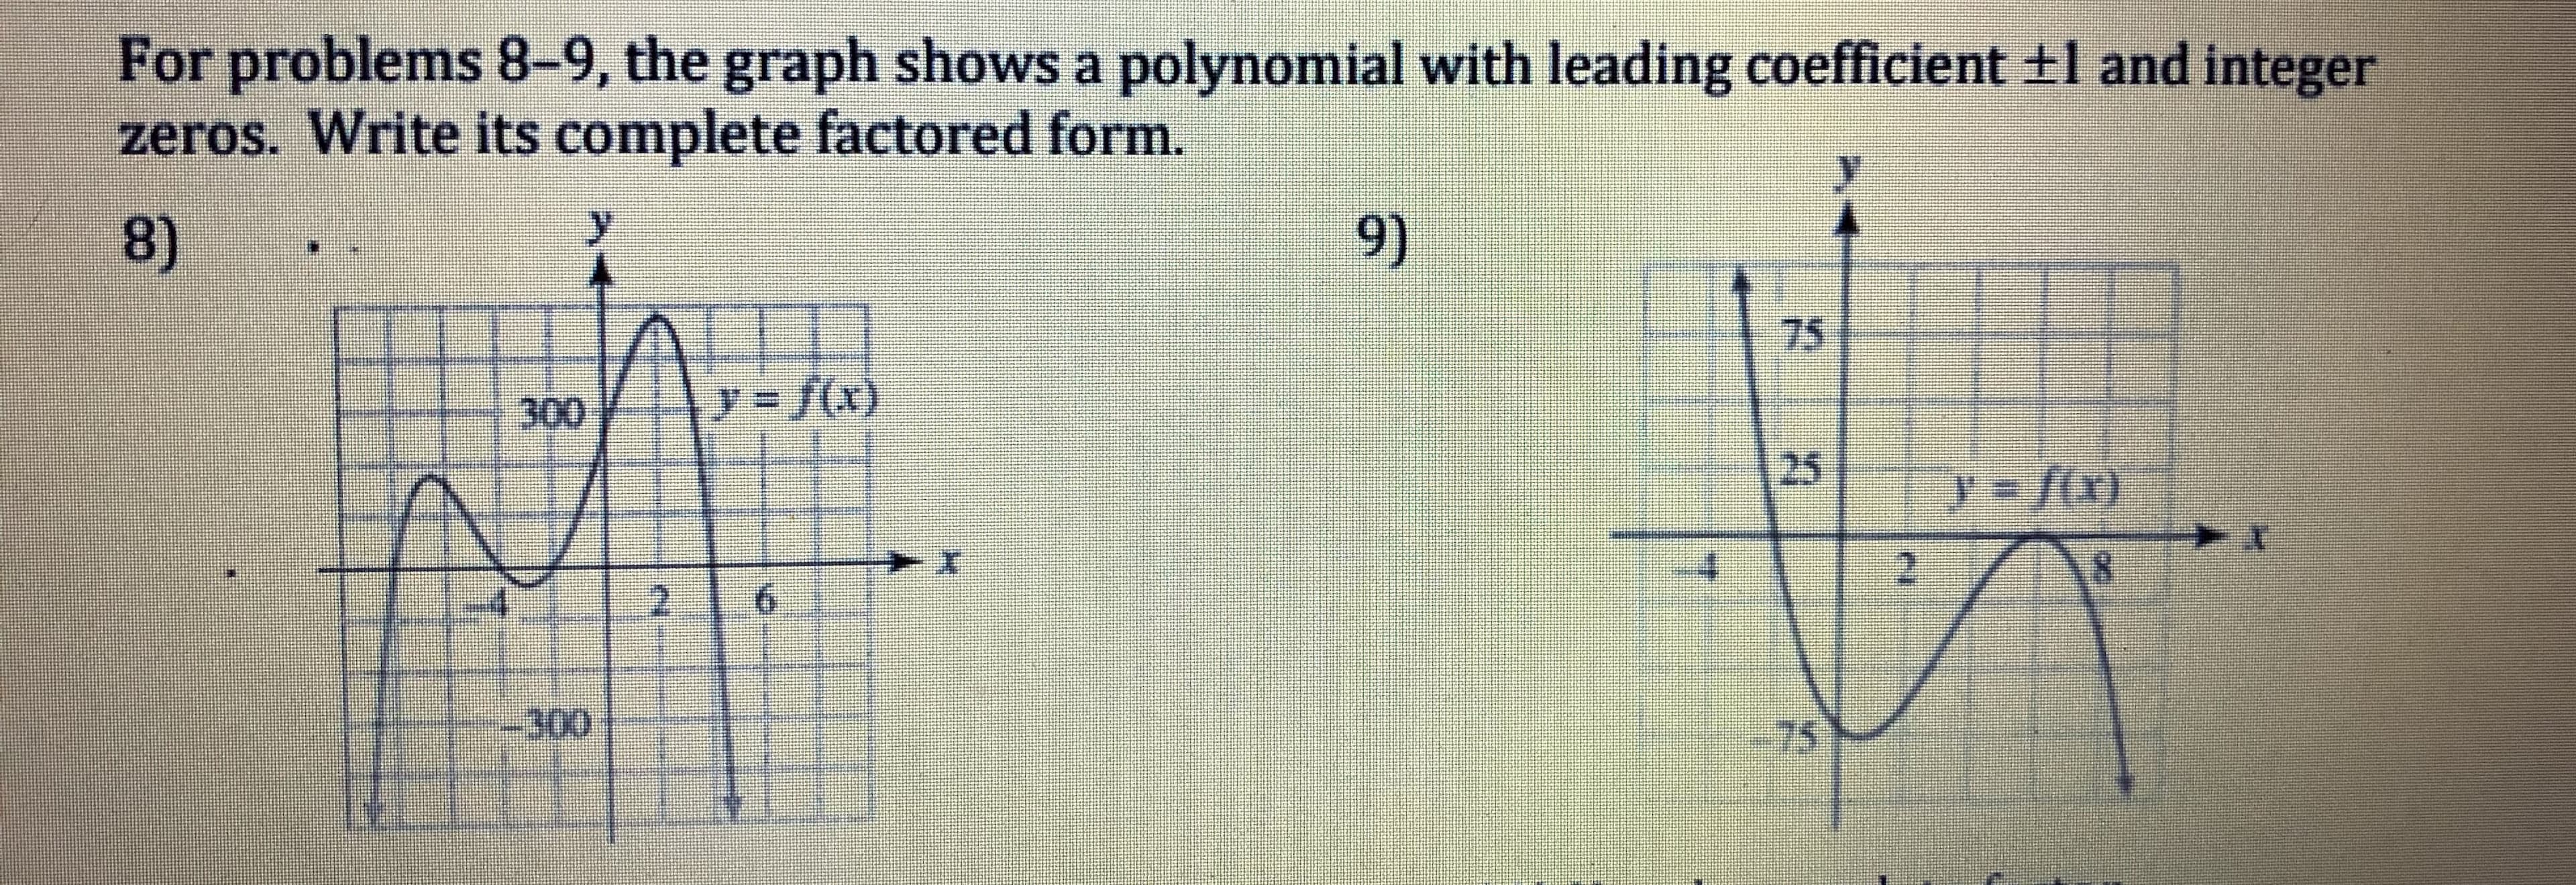 For problems 8-9, the graph shows a polynomial with leading coefficient ±1 and integer
zeros. Write its complete factored form.
8)
9)
75
300
300
